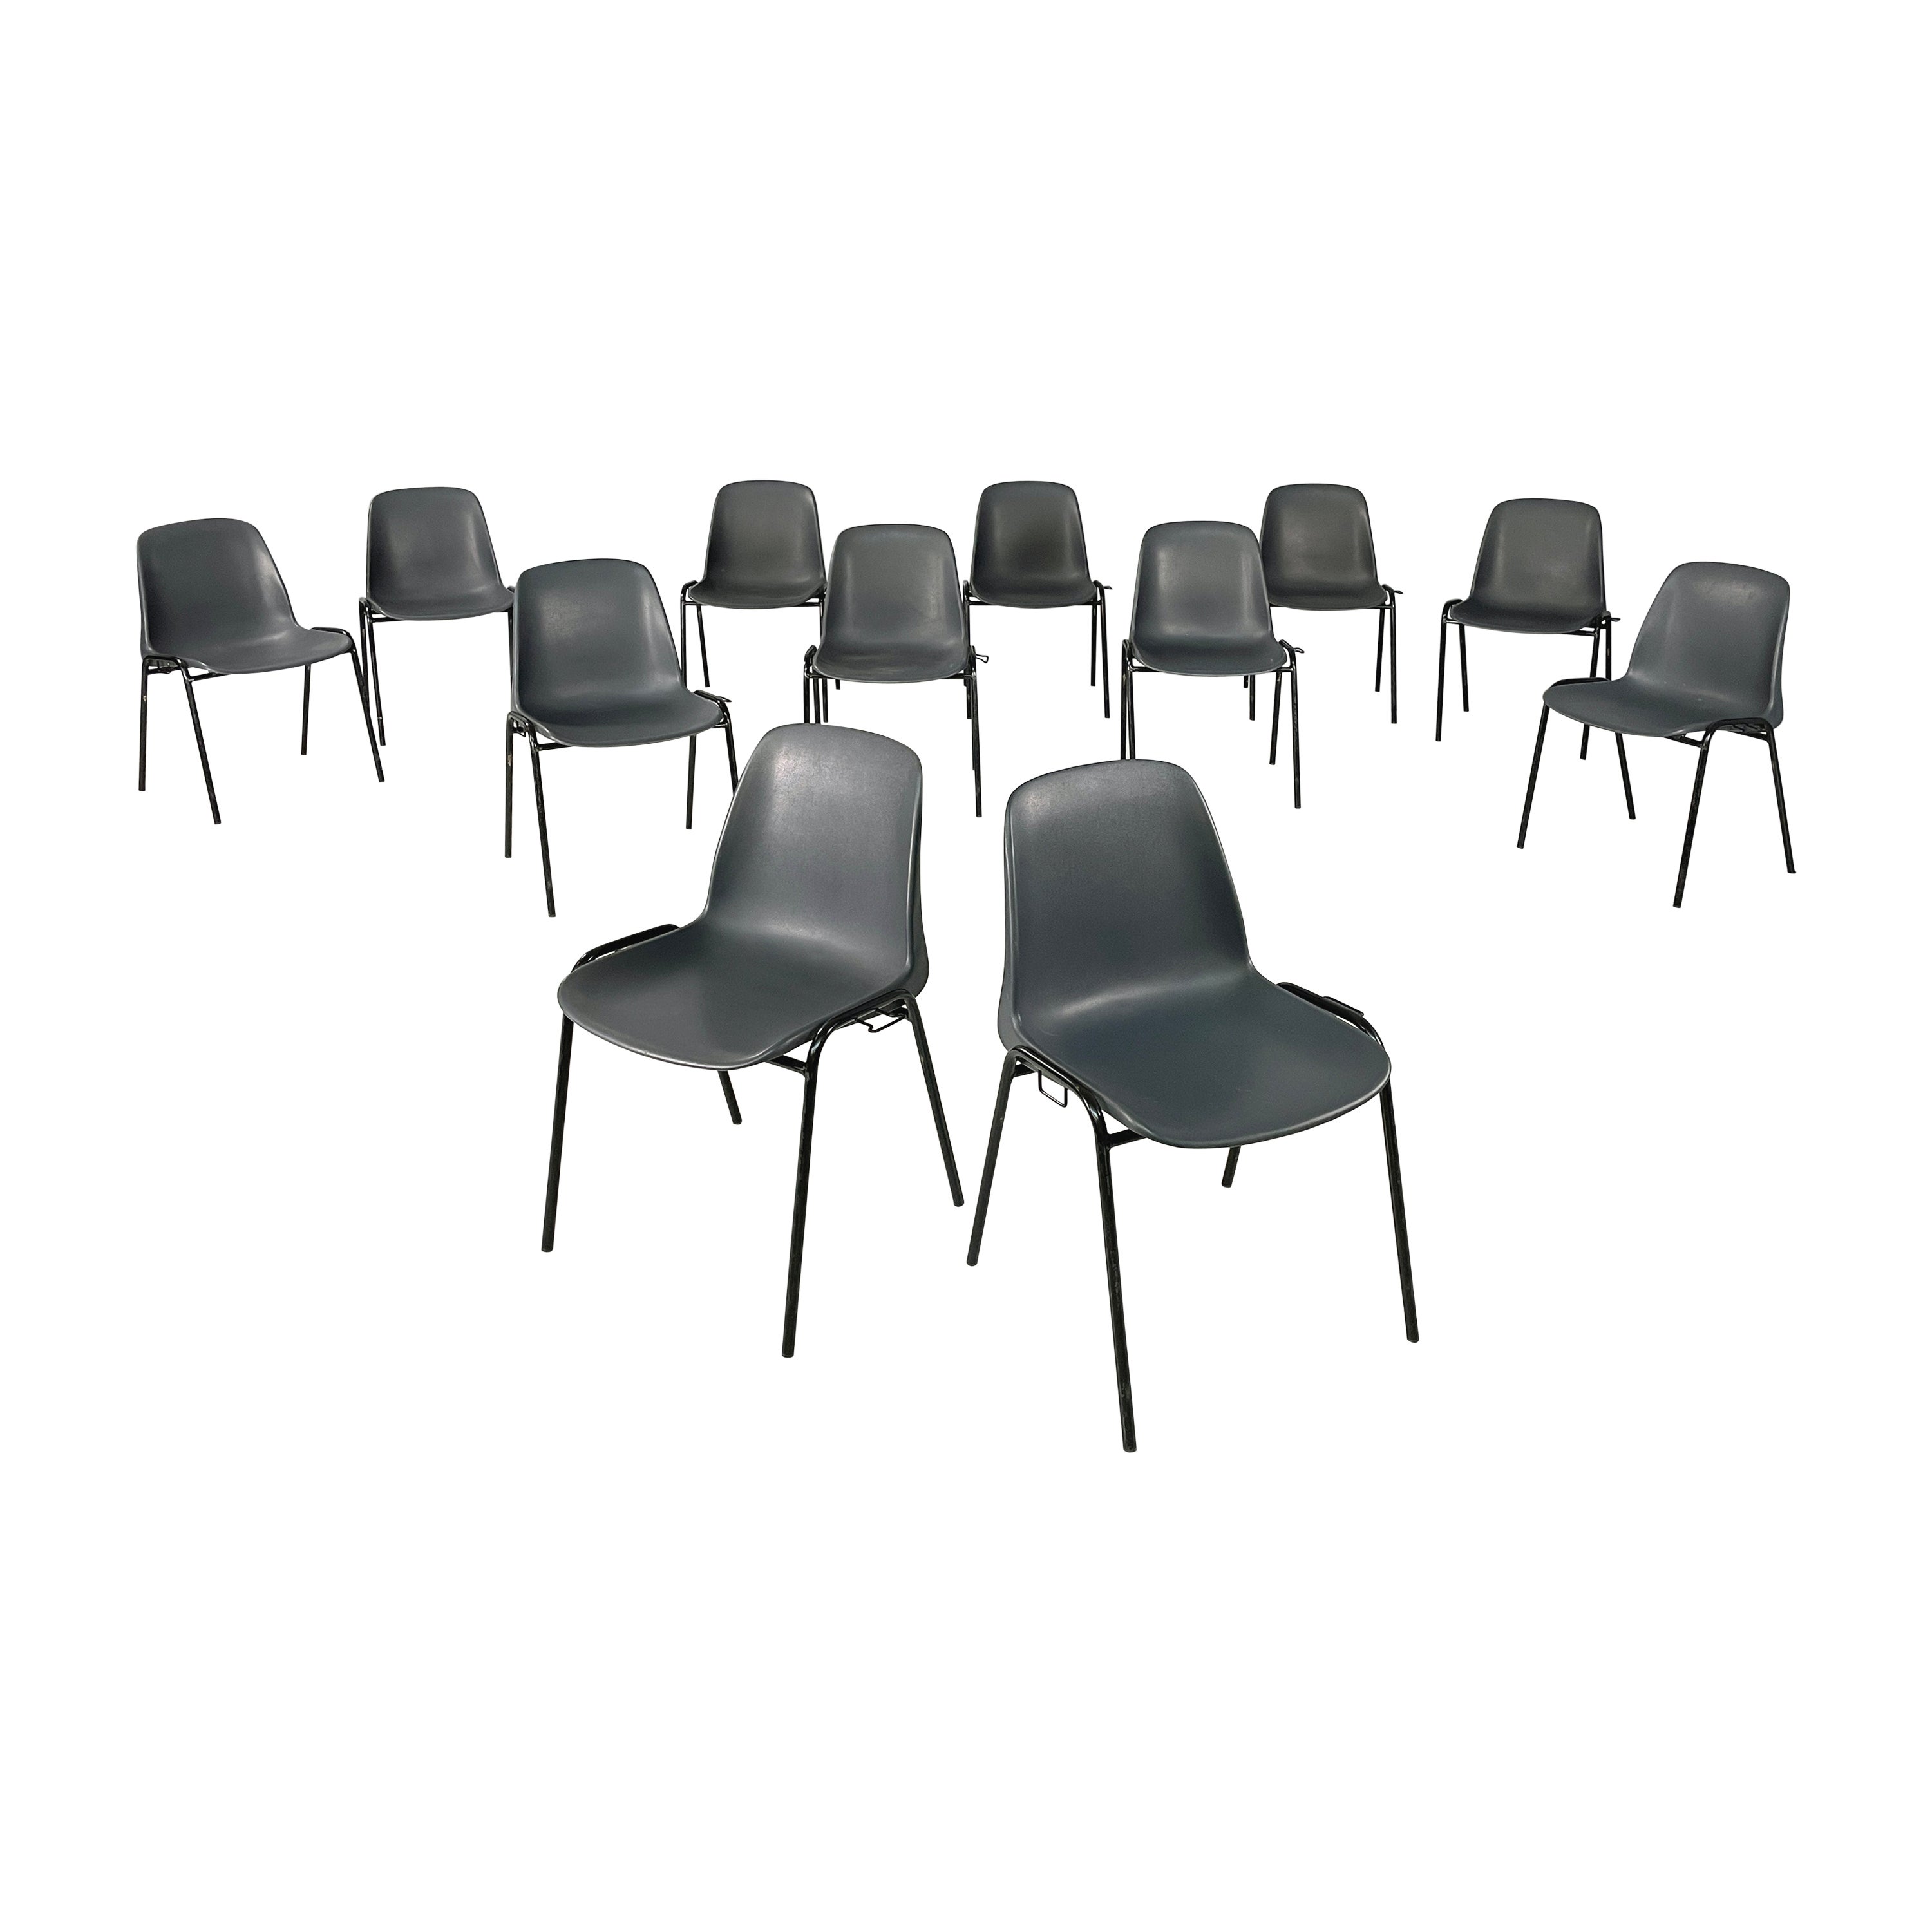 Italian modern Stackable chairs in gray plastic and black metal, 2000s